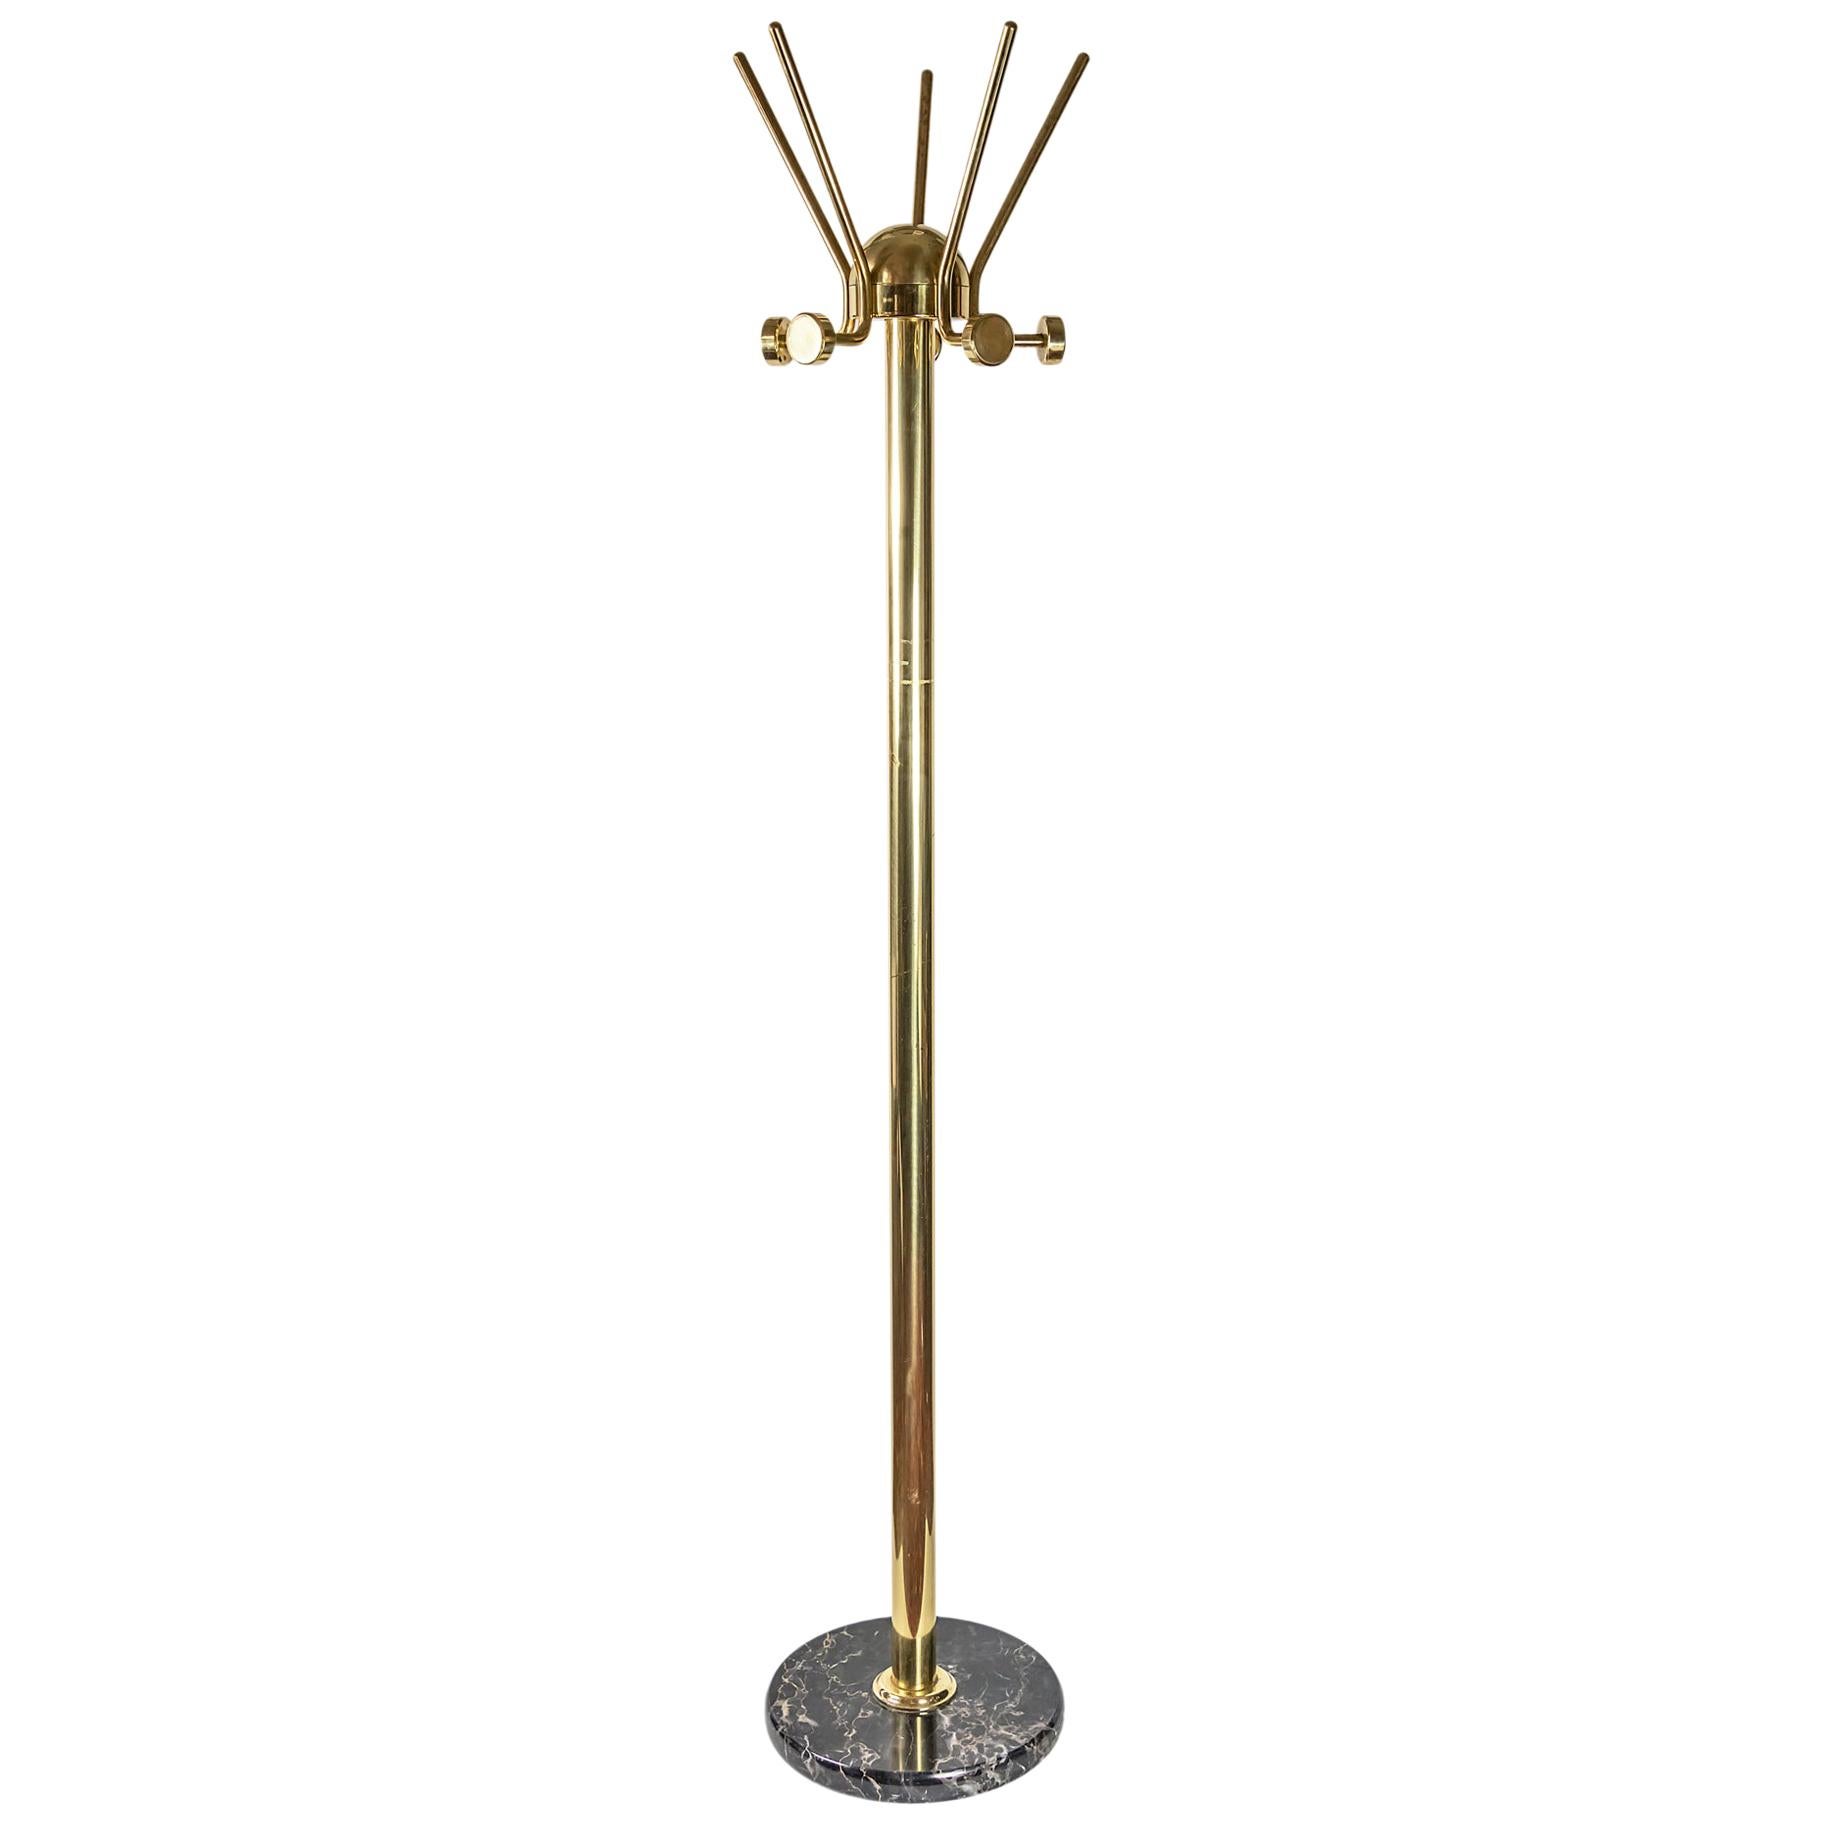 Midcentury Italian Brass and Marble Coat Rack / Stand